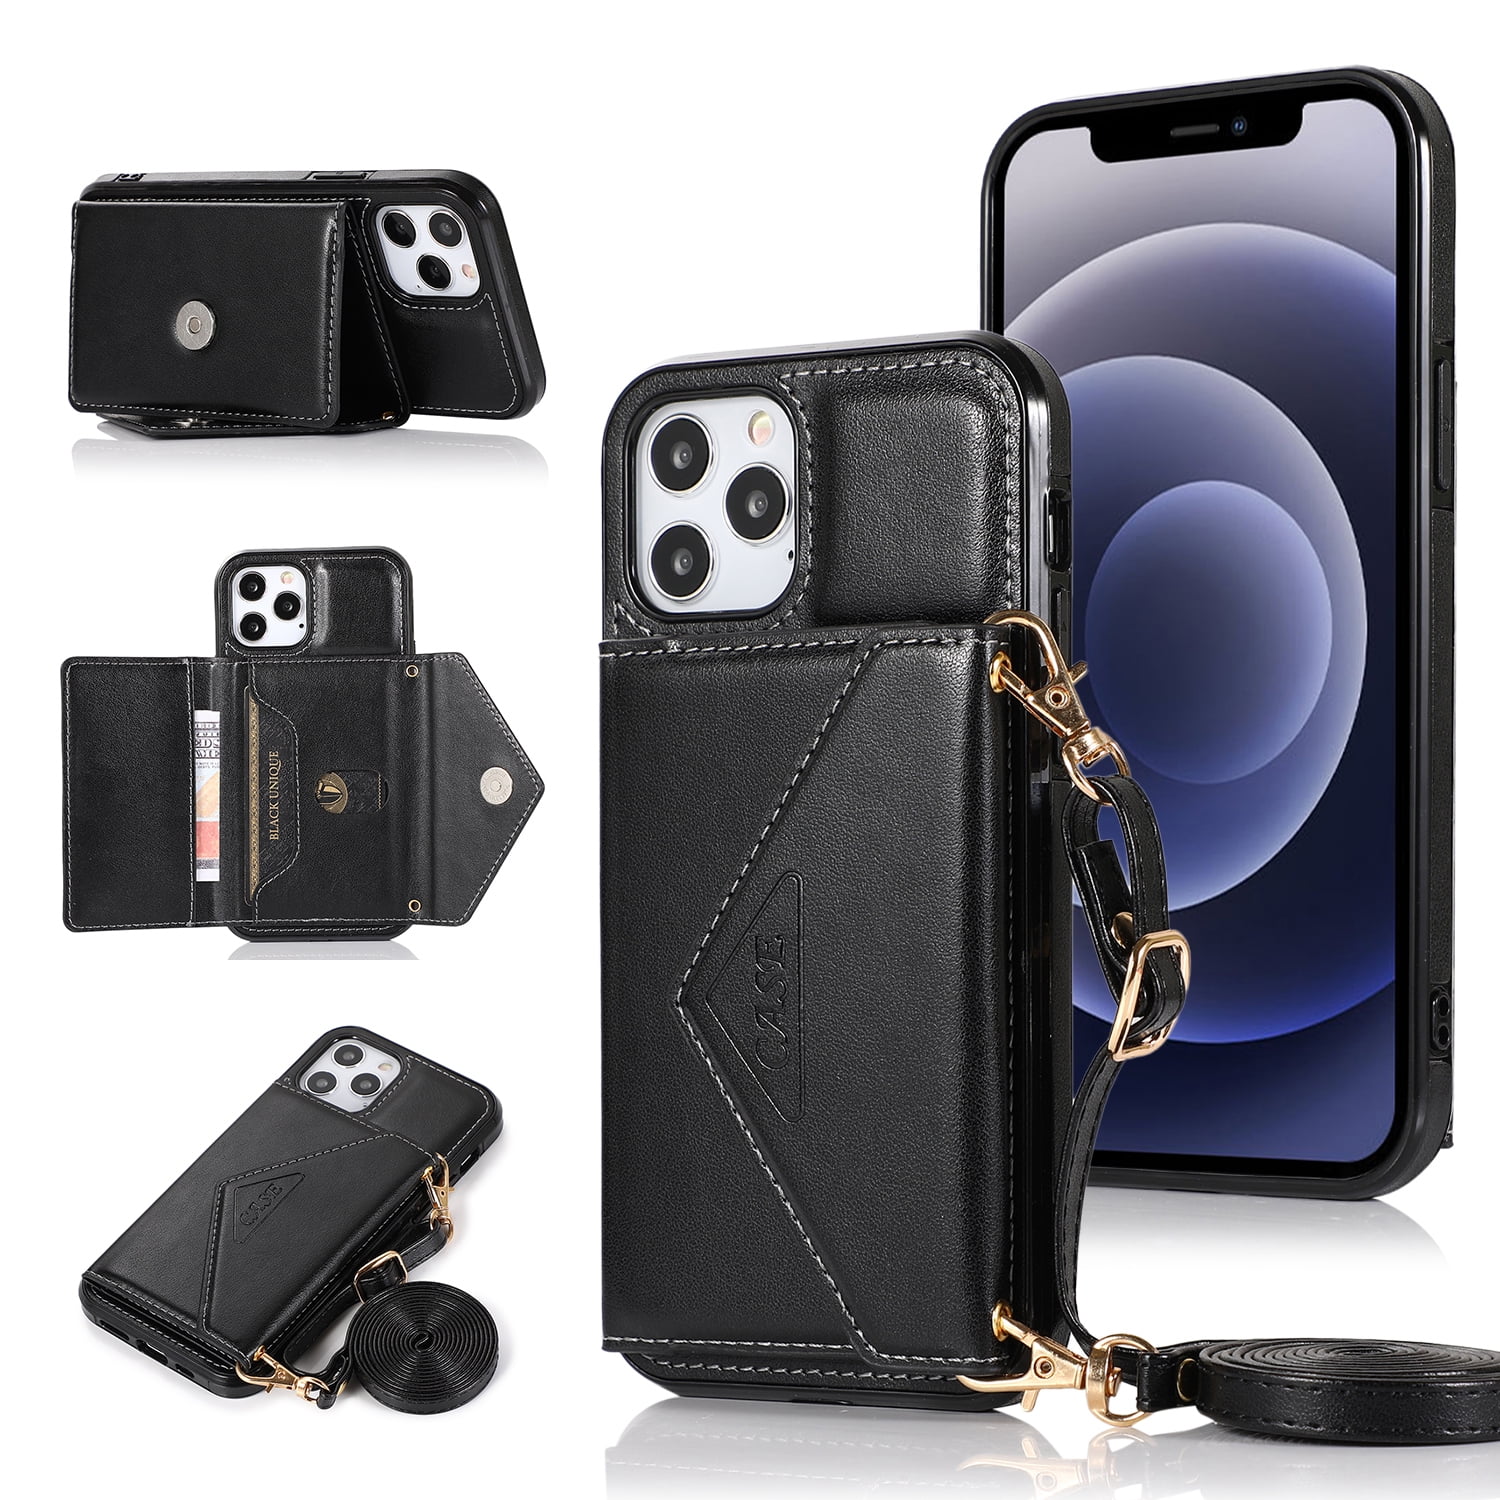 Luxury Square phone Case for iphone 8 case Vintage Lattice leather Soft  back Cover for iPhone X 6 6S 7 8 plus coque with lanyard